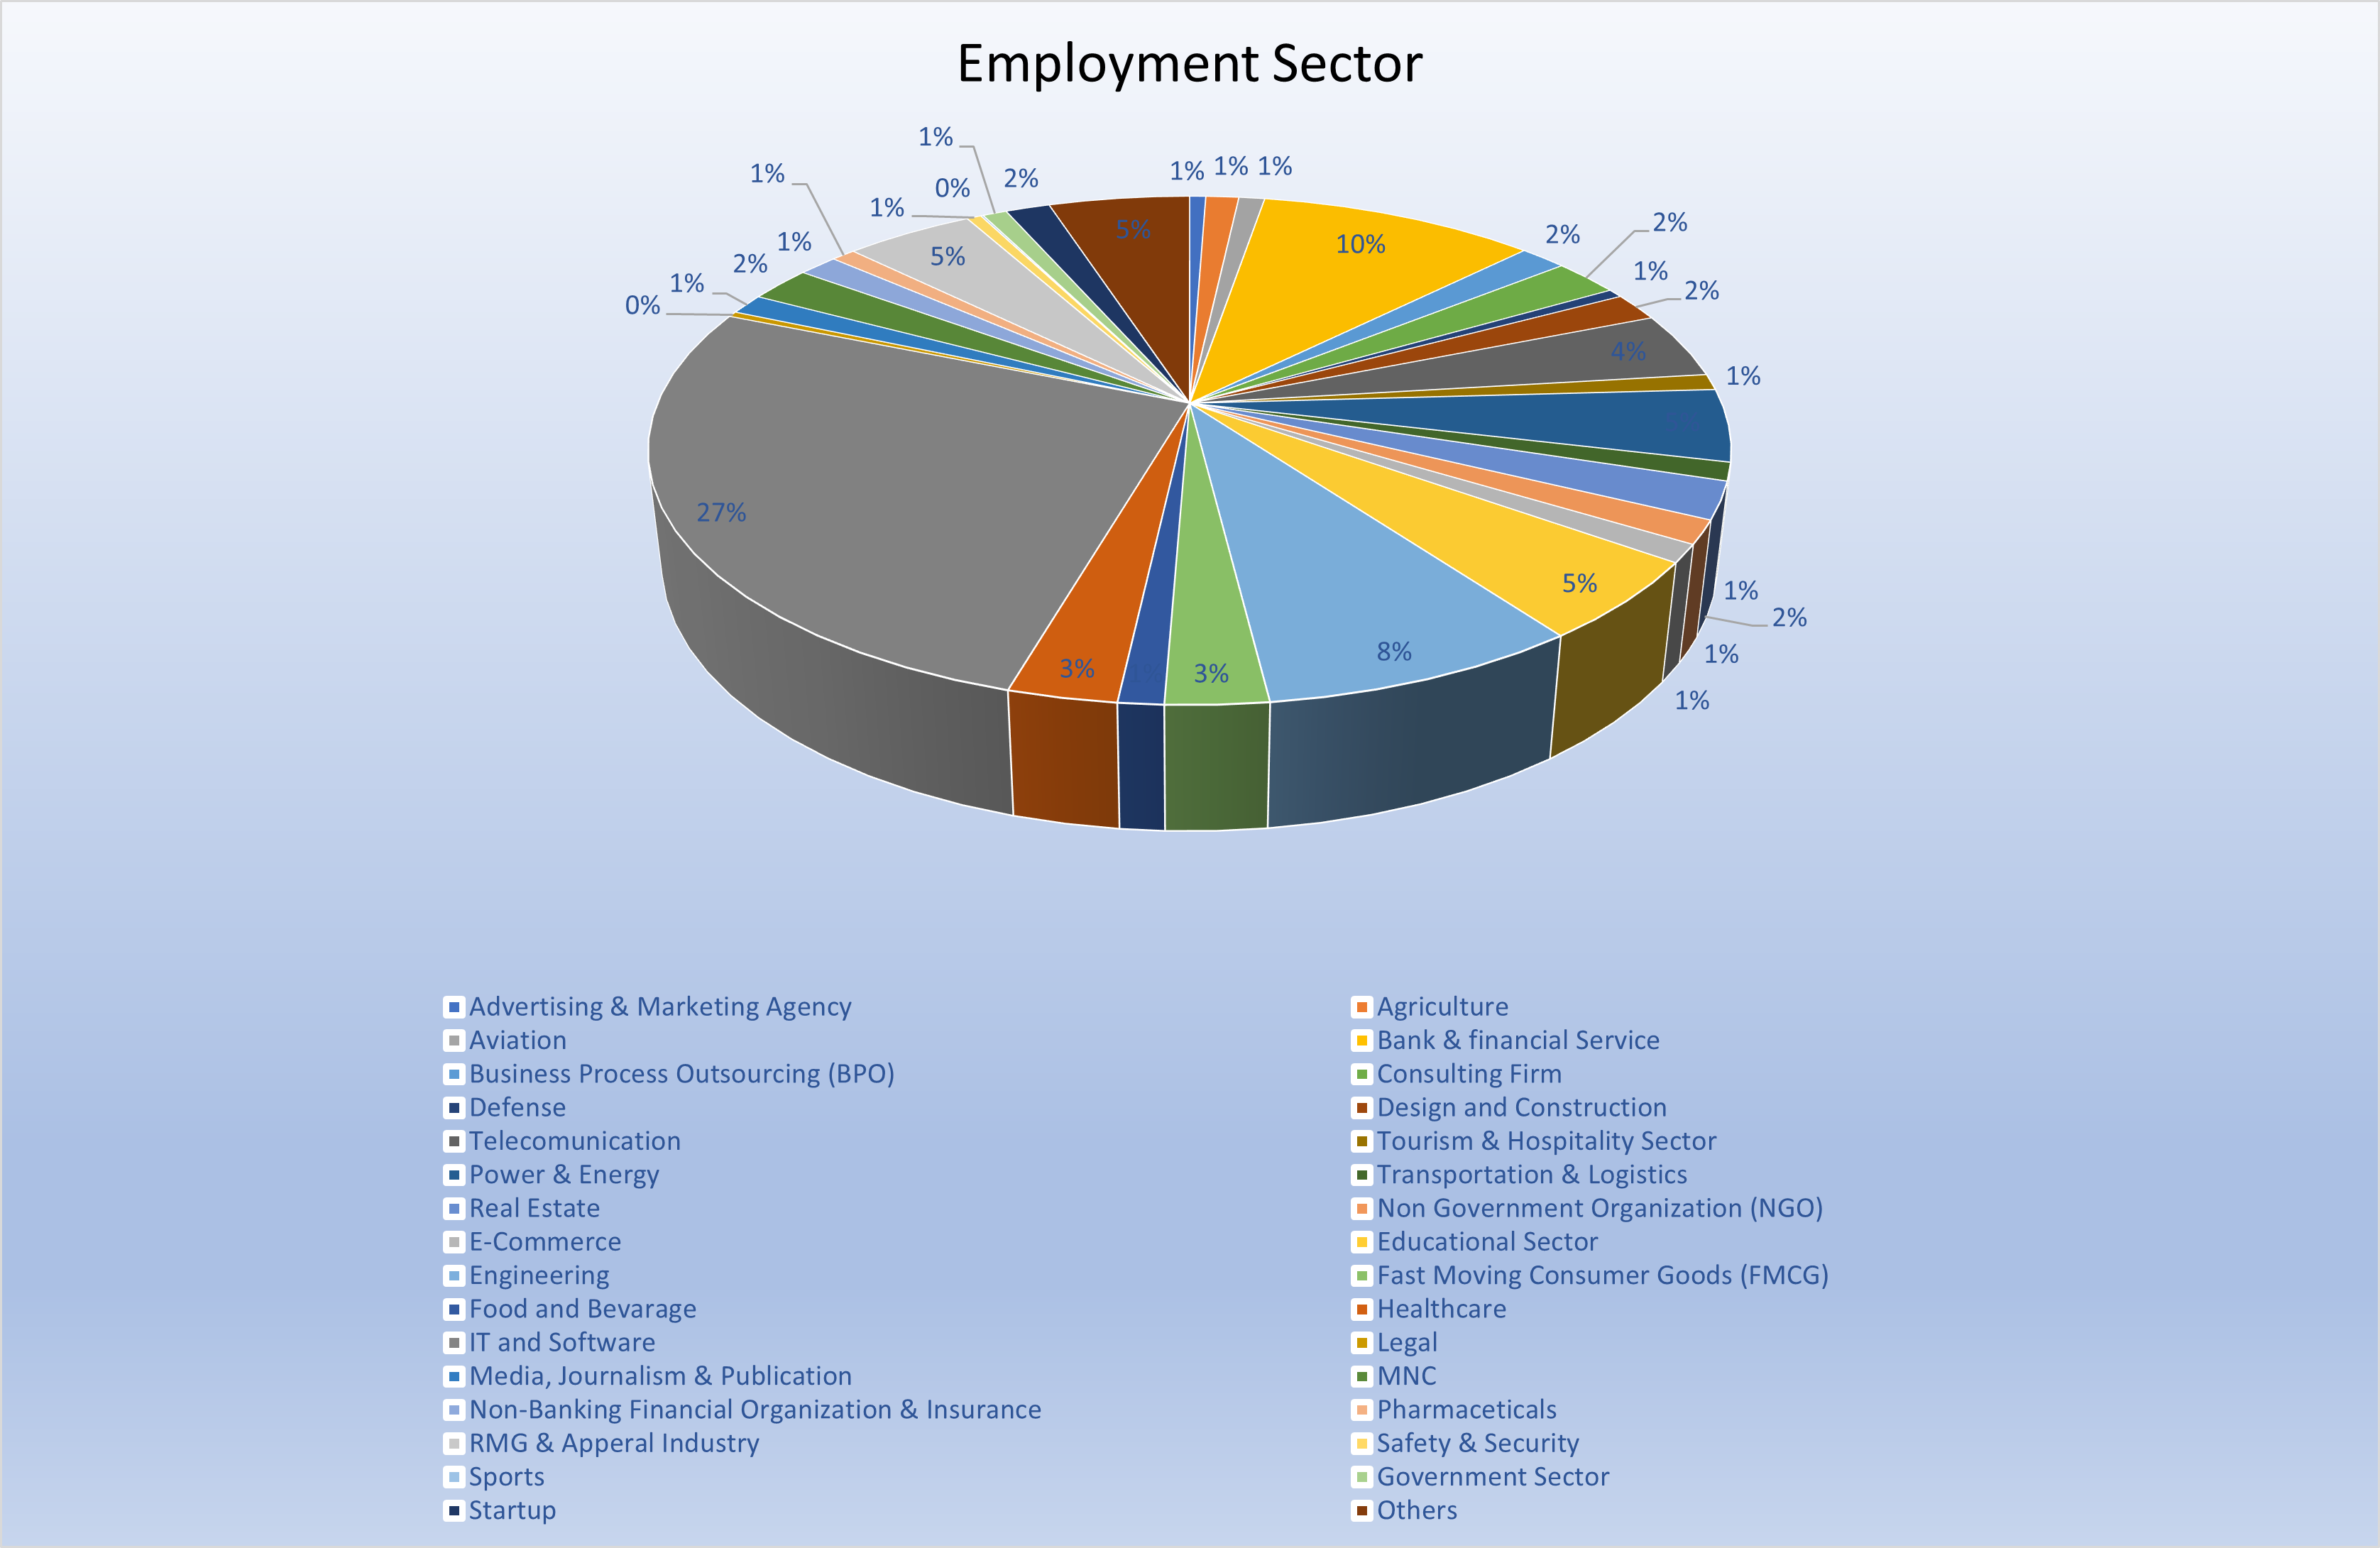 The pie chart shows the distribution of employment by sector